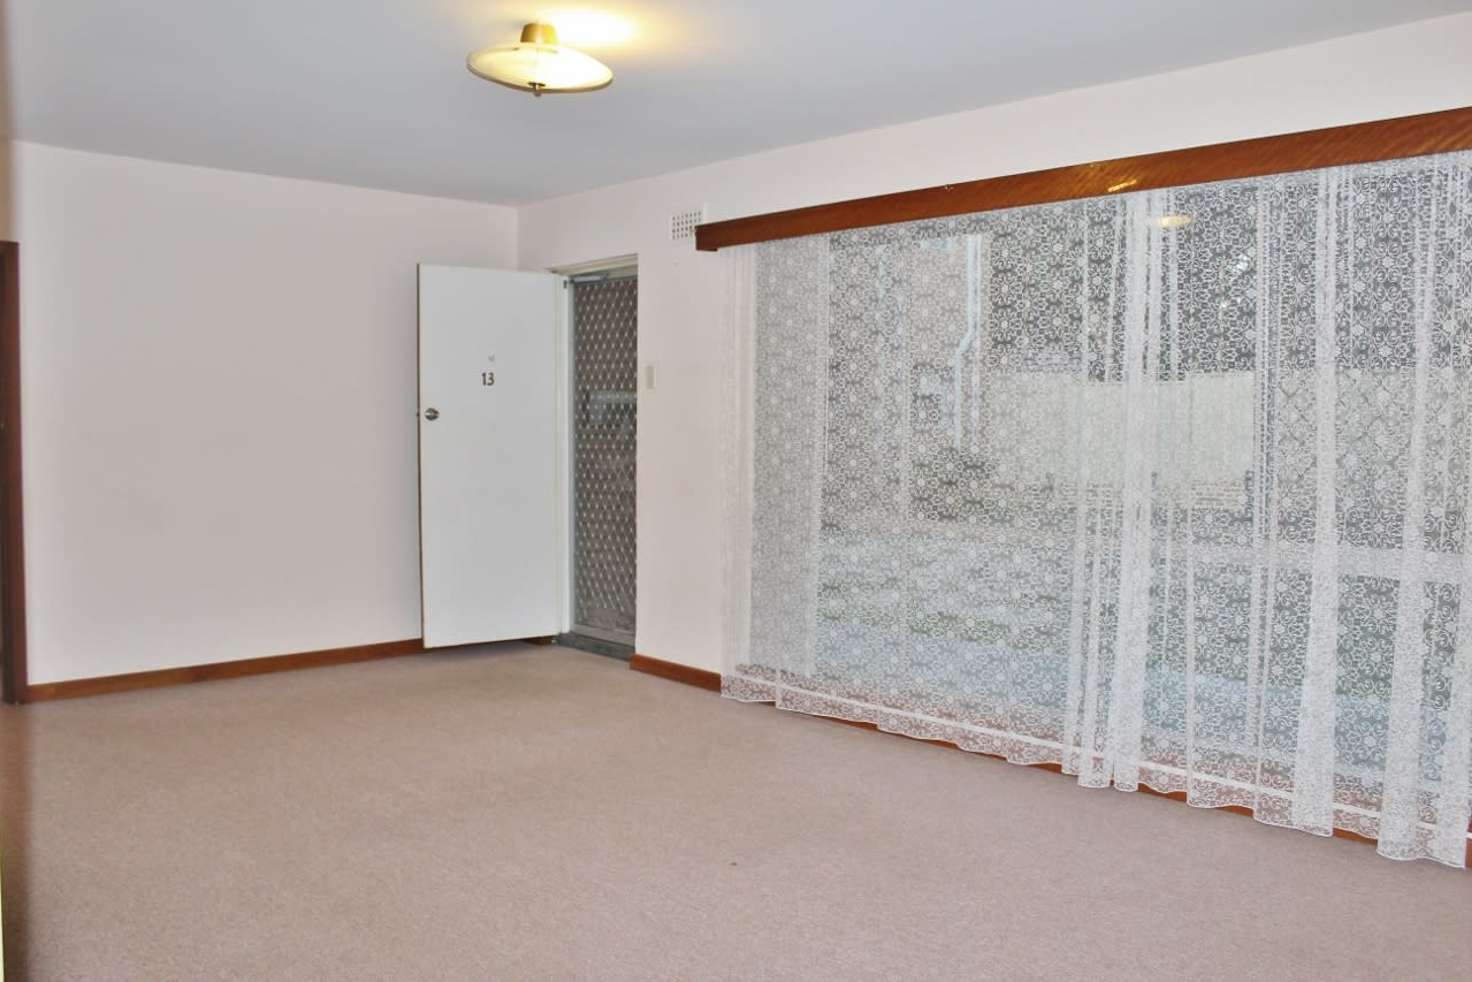 Main view of Homely unit listing, 13/445 Canning Hwy, Melville WA 6156